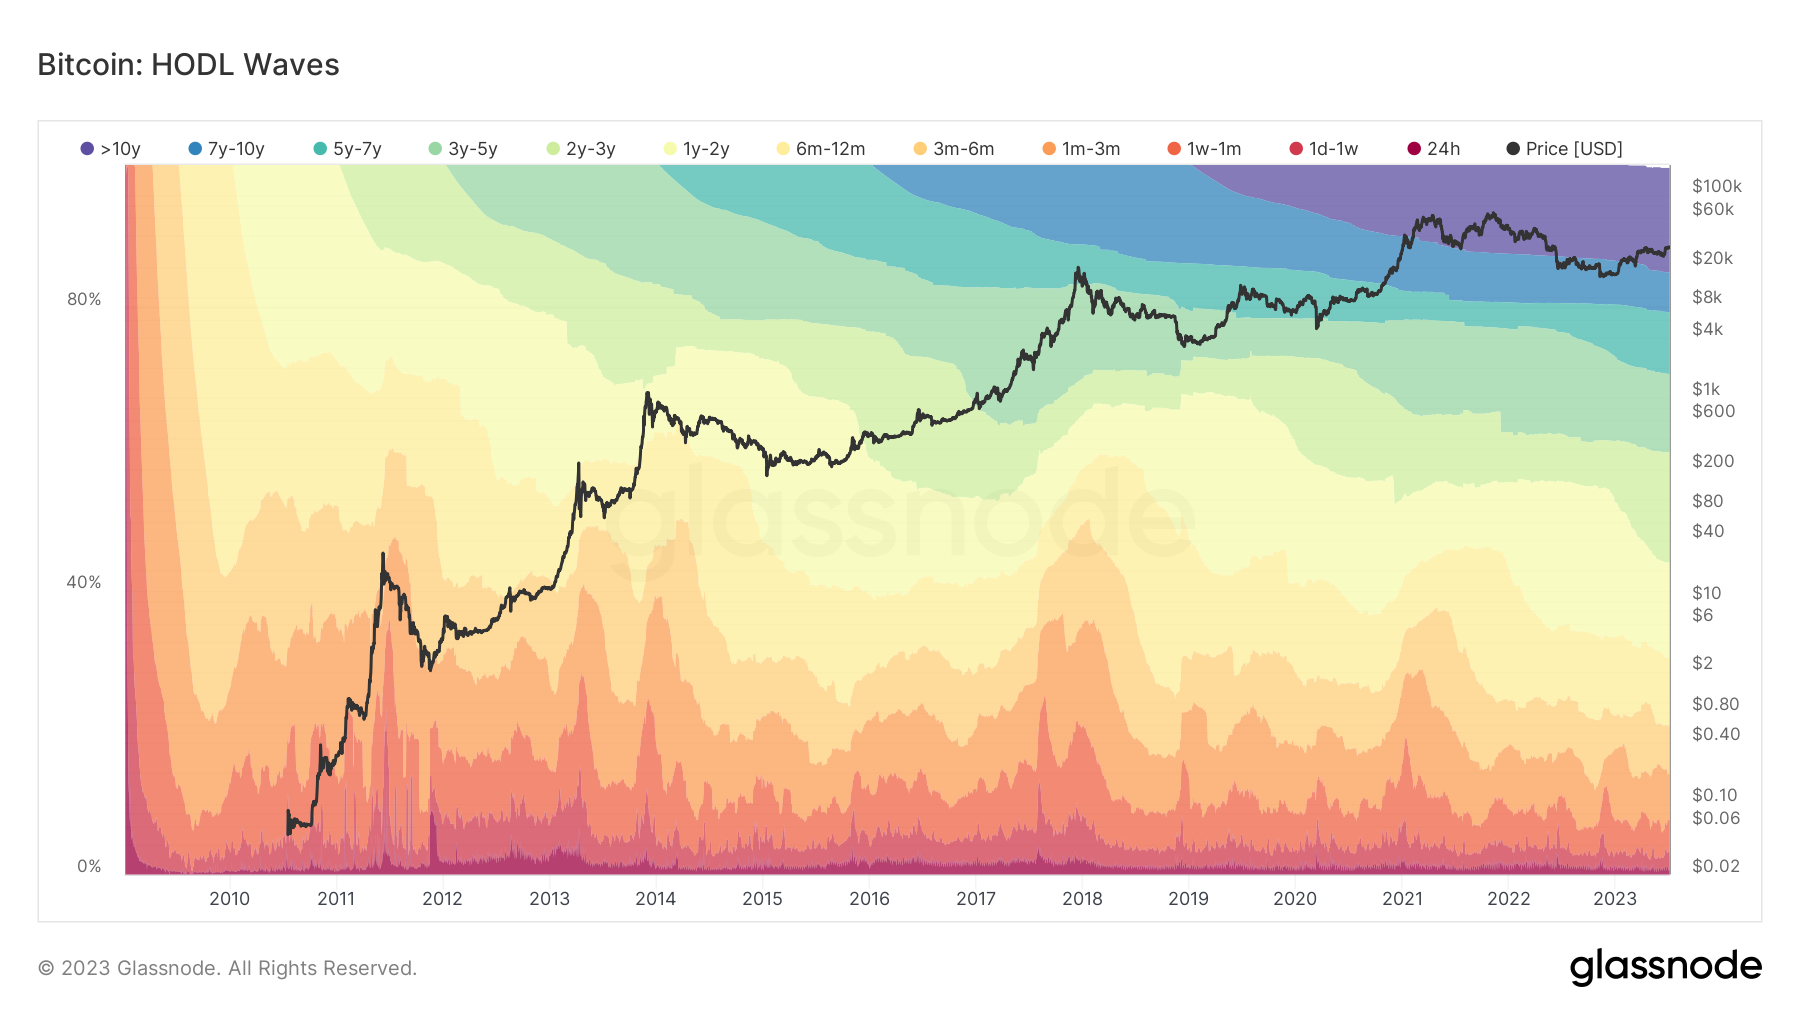 This chart shows HODL waves, or trends of longterm bitcoin holders.